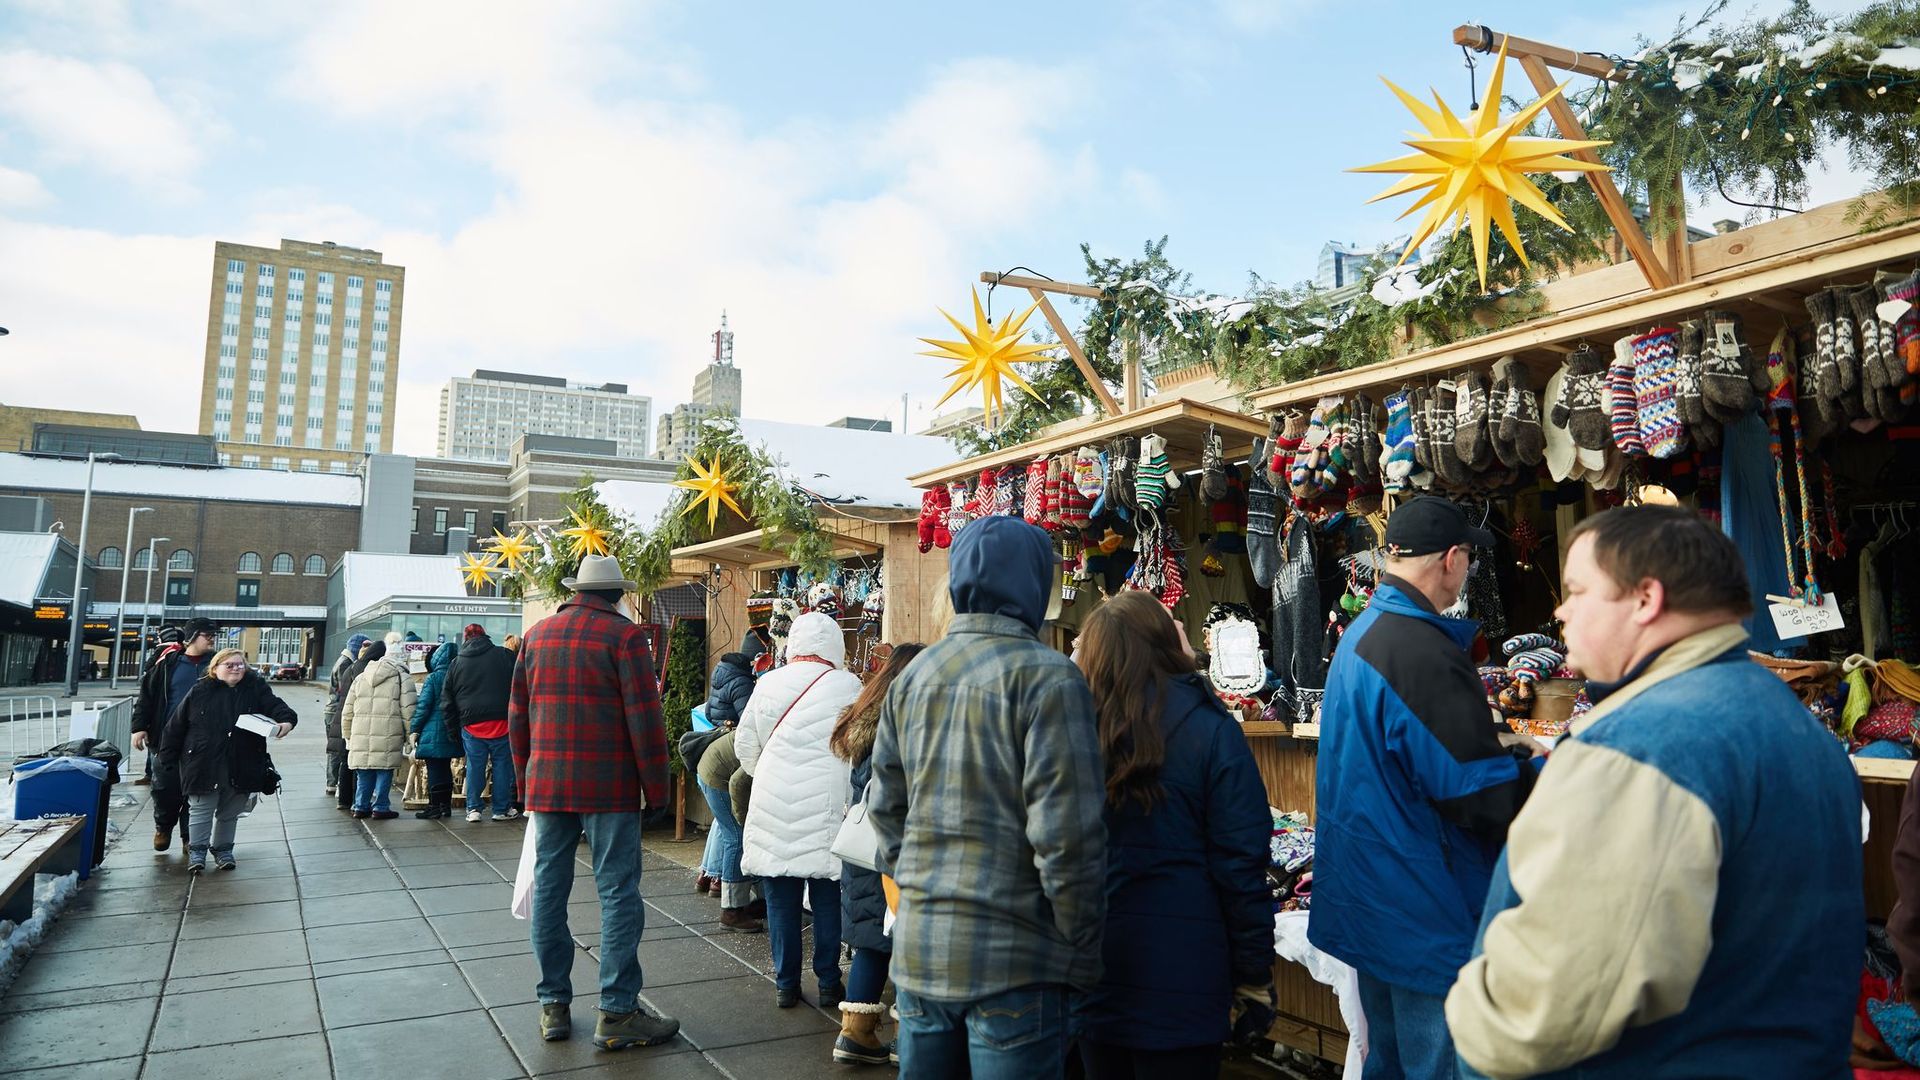 A group of people standing outside a small wooden stand that is decorated with greenery and stars.